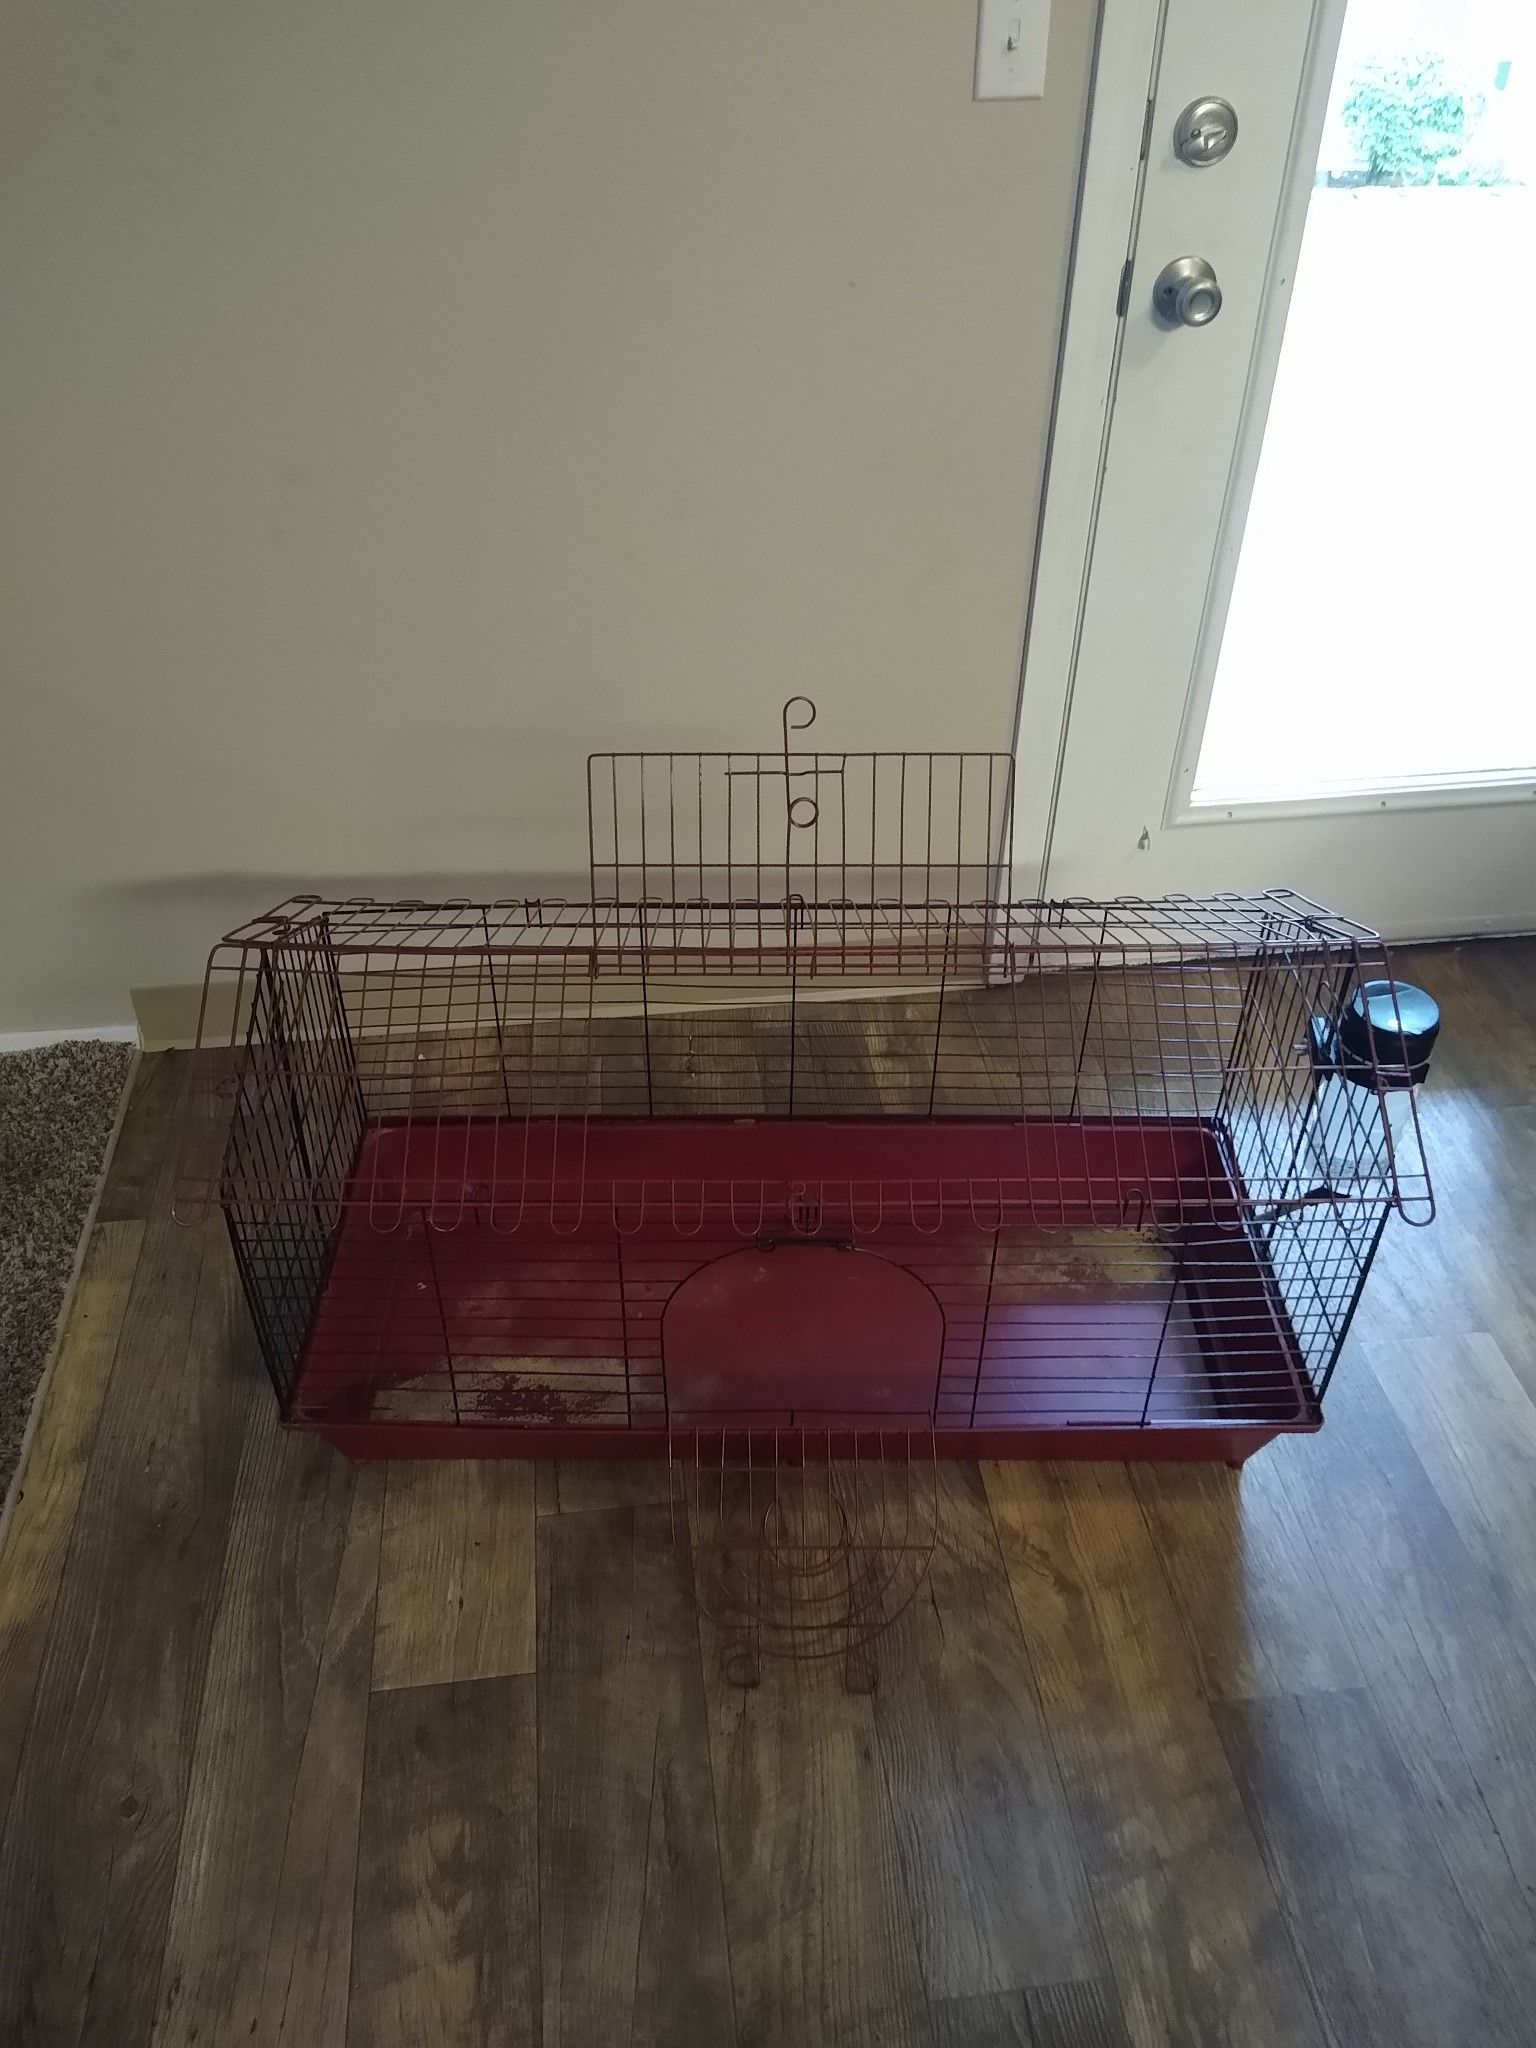 Large bunny cage with water cartridge